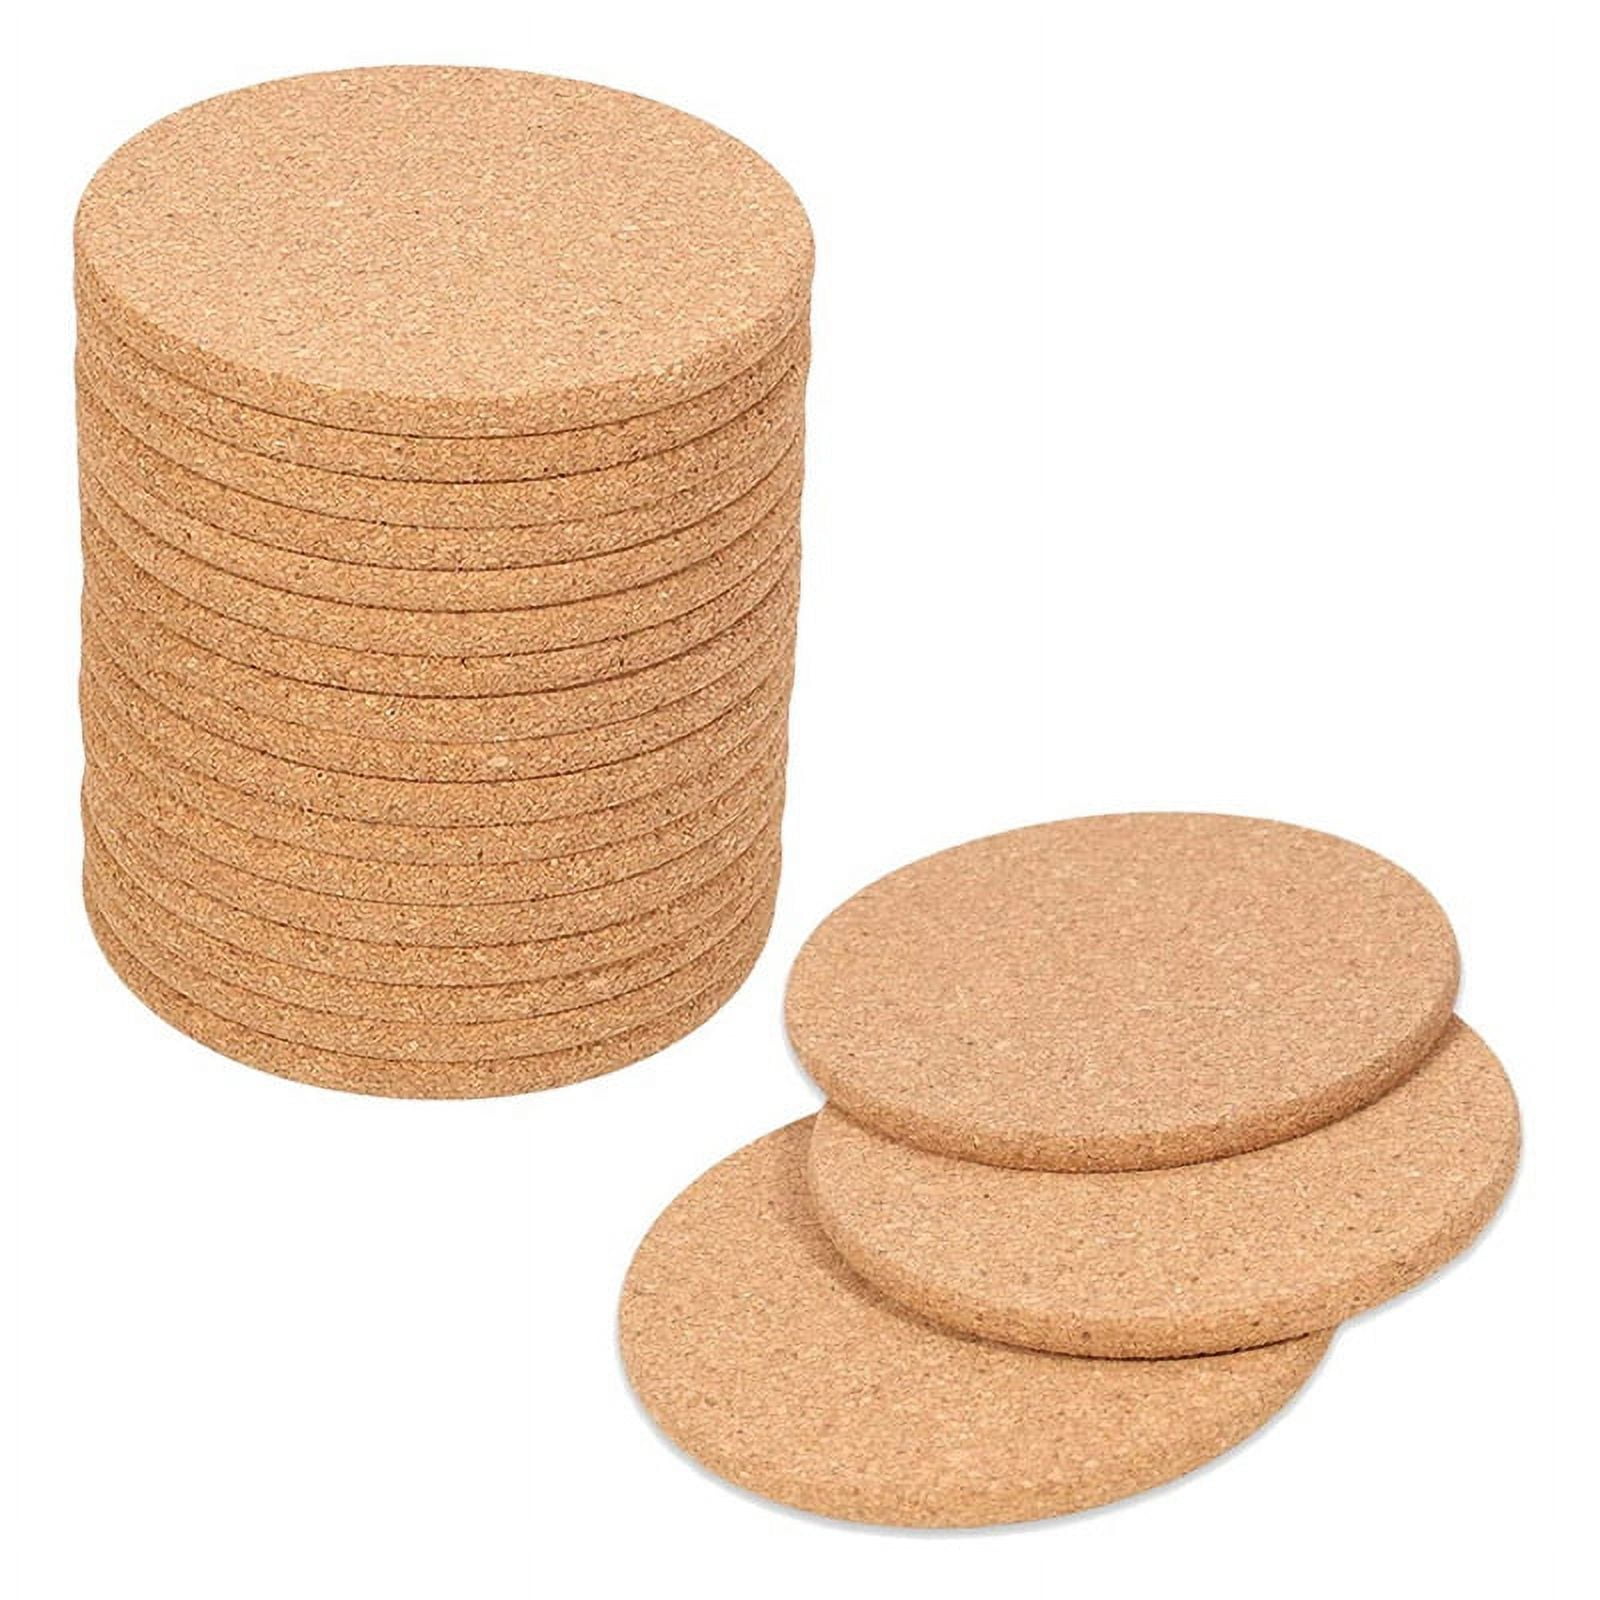 Designer Wooden Coasters, For Kitchen And Dining, Drink Cup Coaster Set -  Absorbent Coasters with Holder for Coffee Table, Upgraded Thicker Coasters  for Drinks Absorbent Cork Coasters.